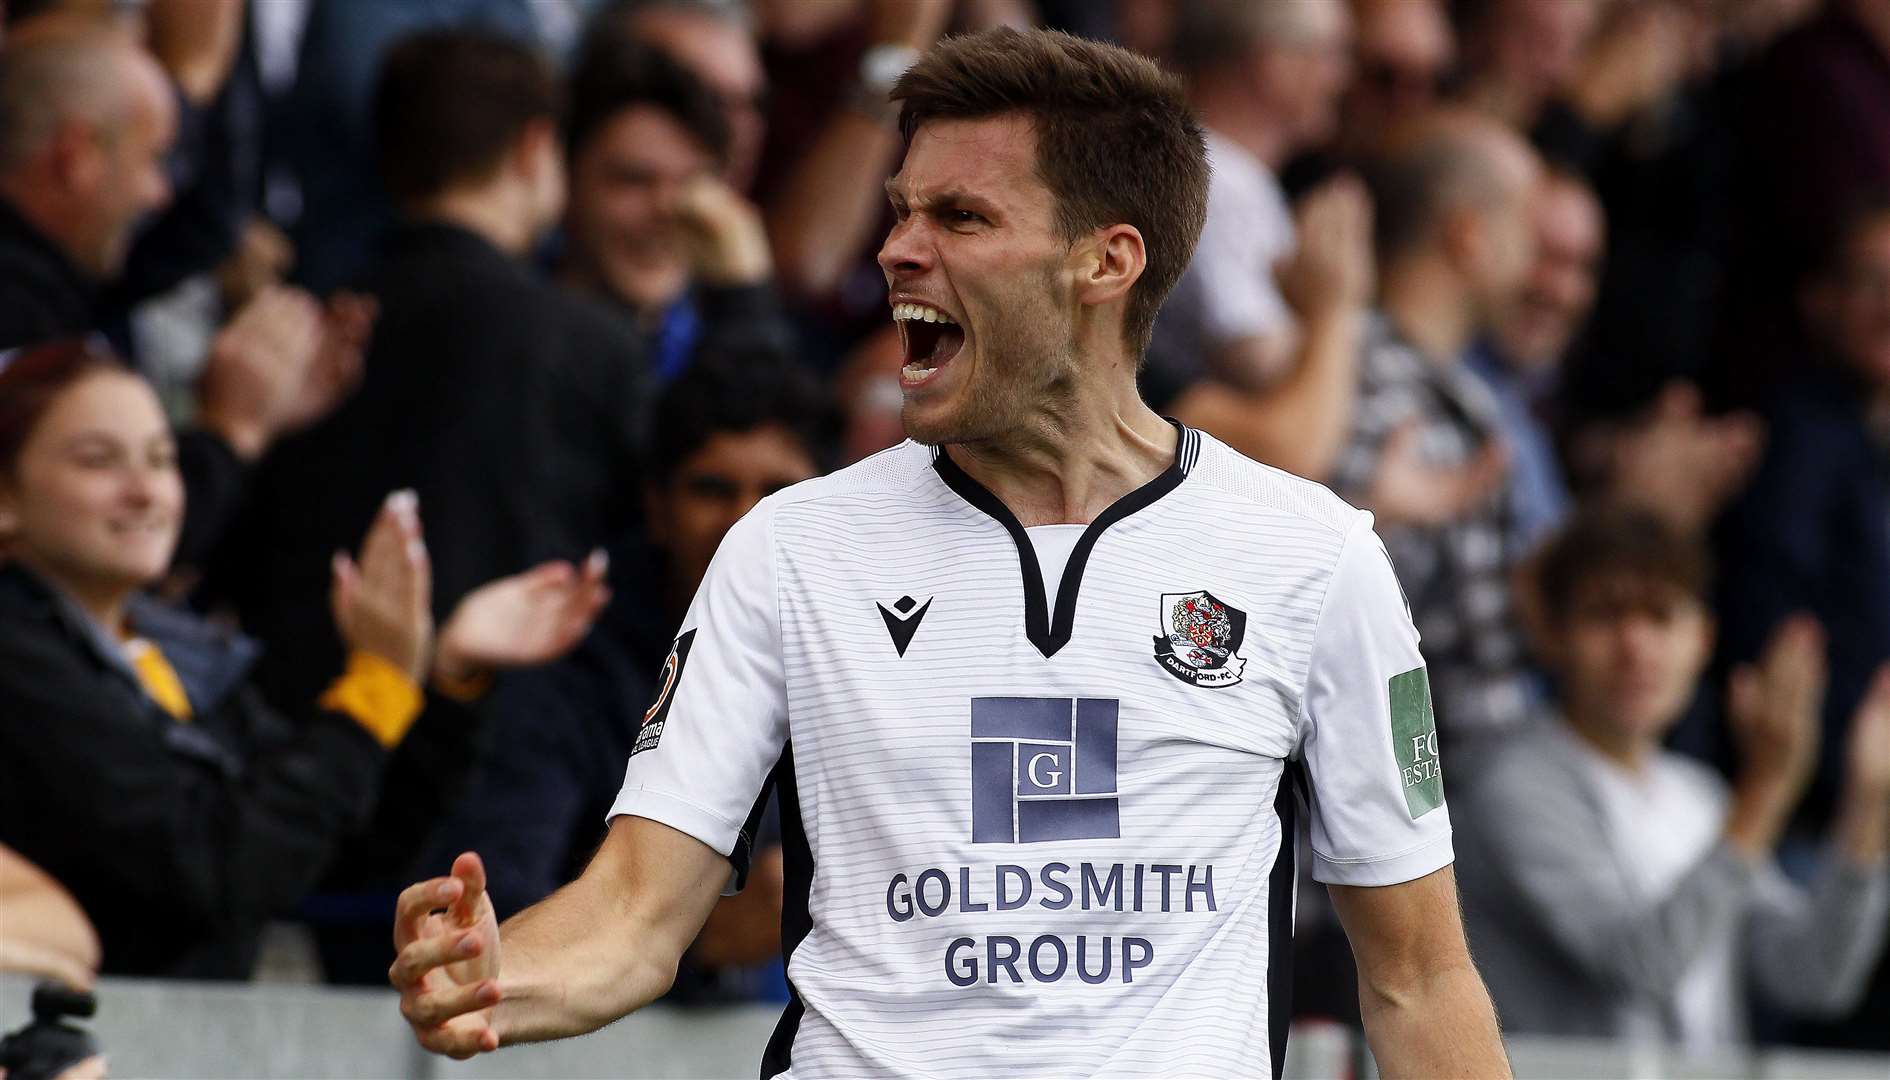 Charlie Sheringham - came off the bench to open the scoring for Dartford.